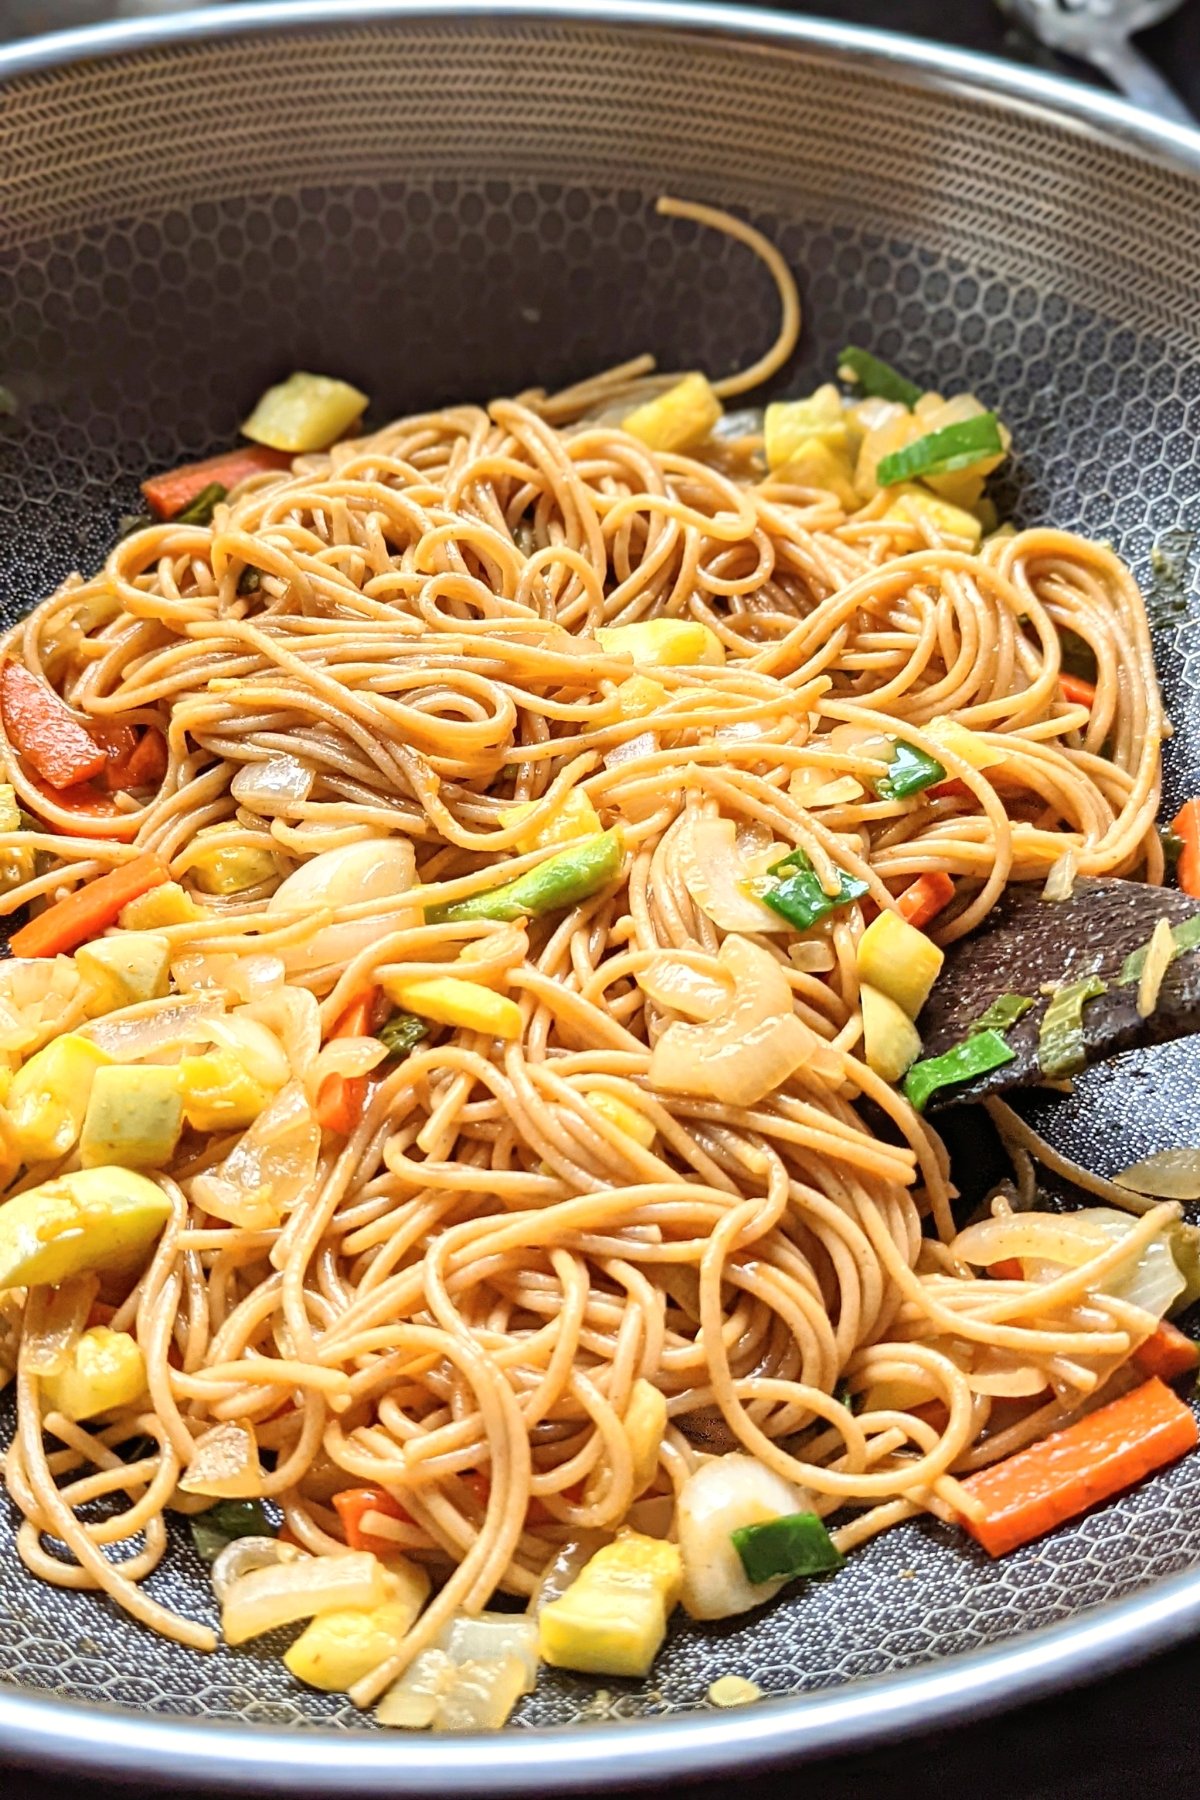 veggie noodle stir fry recipe with vegetables and vegan stir fry noodles in a vegetarian sauce without soy sauce